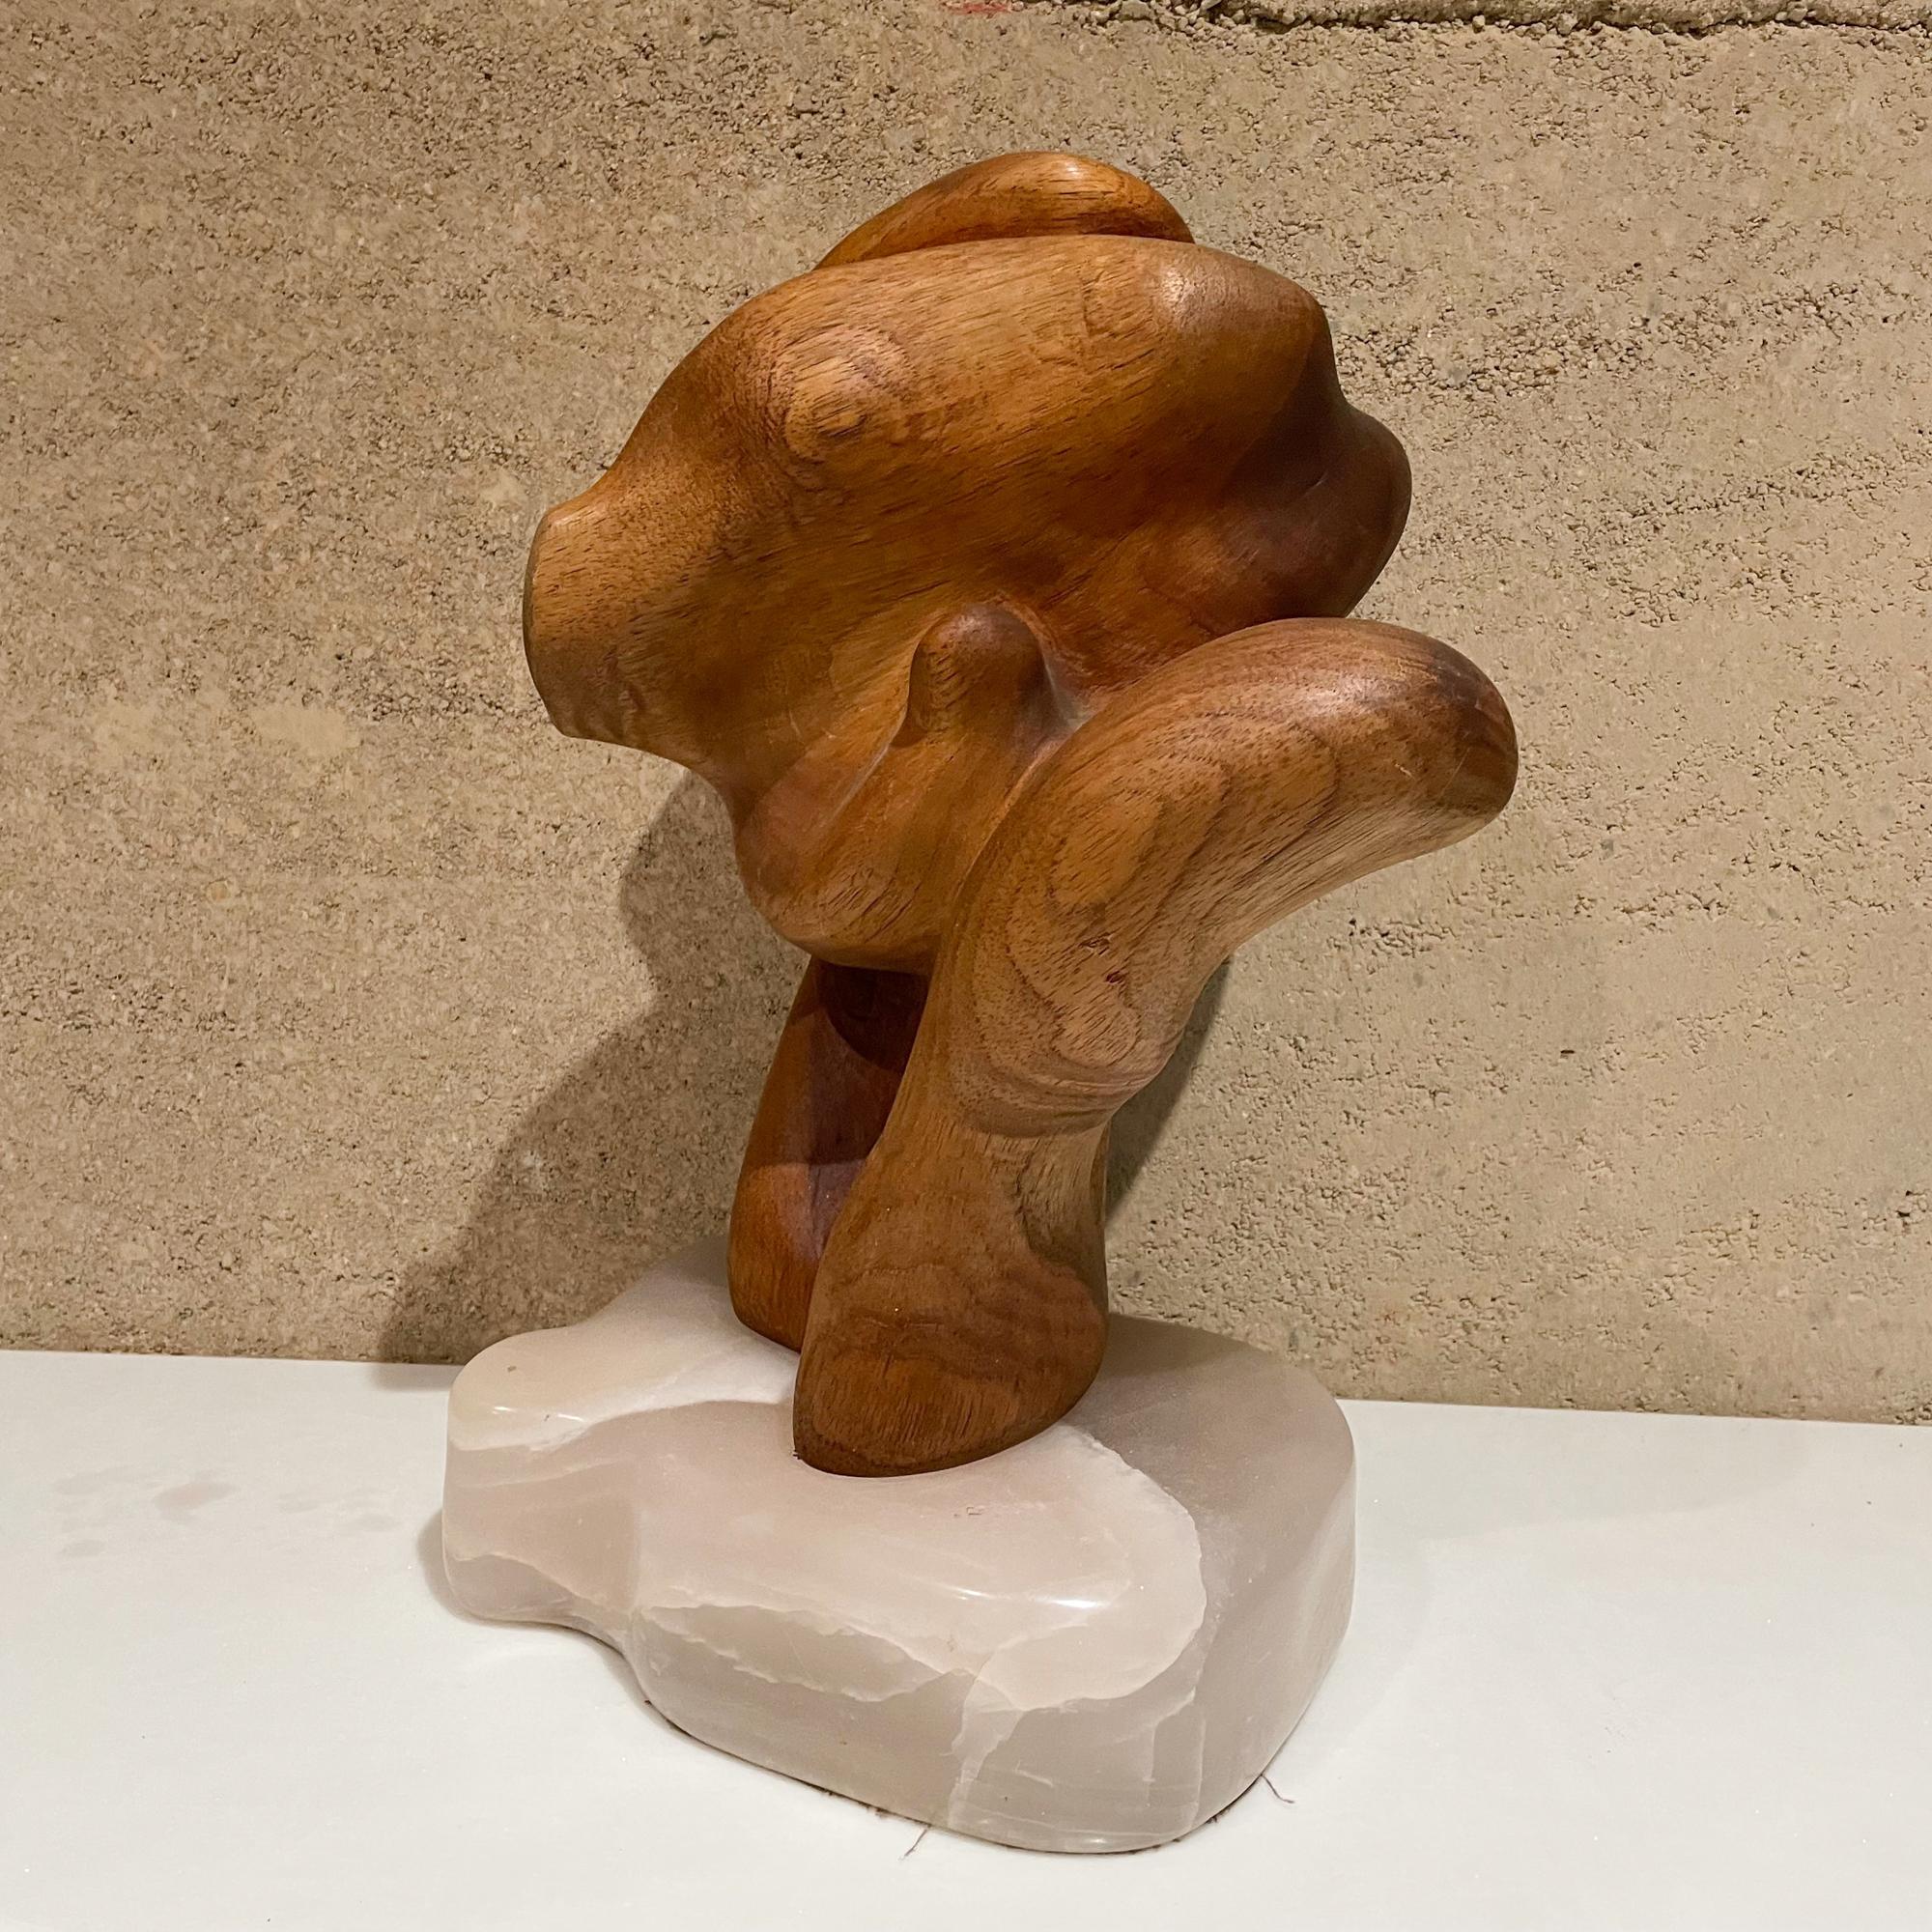 Abstract Organic Form Exquisite Wood Grain Sculpture on Translucent Stone Base In Good Condition For Sale In Chula Vista, CA